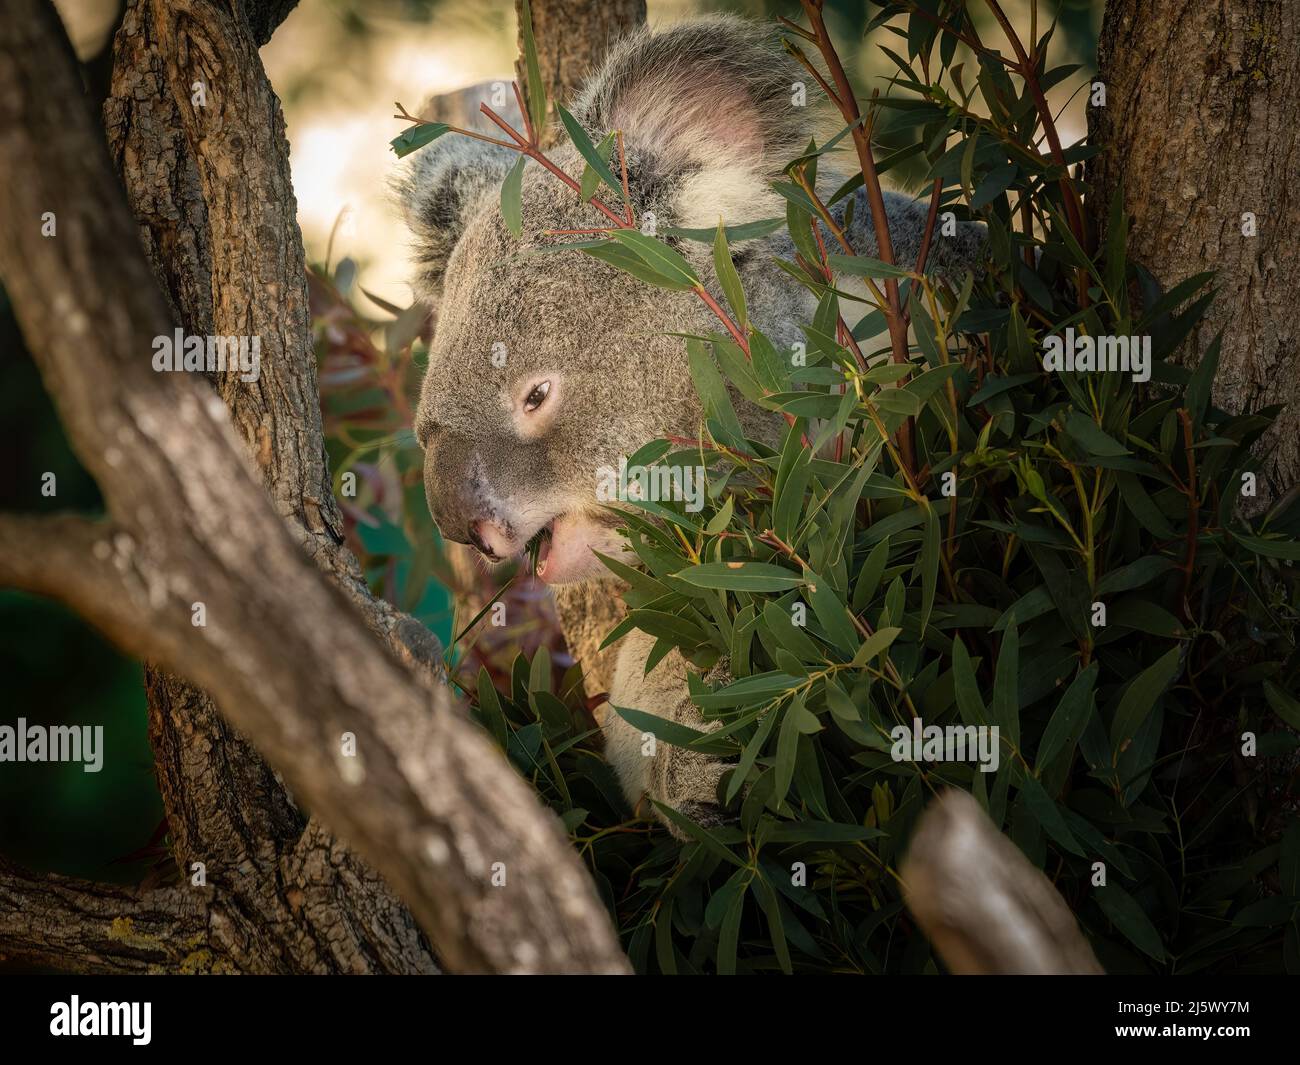 A cute little koala (Phascolarctos cinereus) sitting and eating on a tree in a zoo Stock Photo